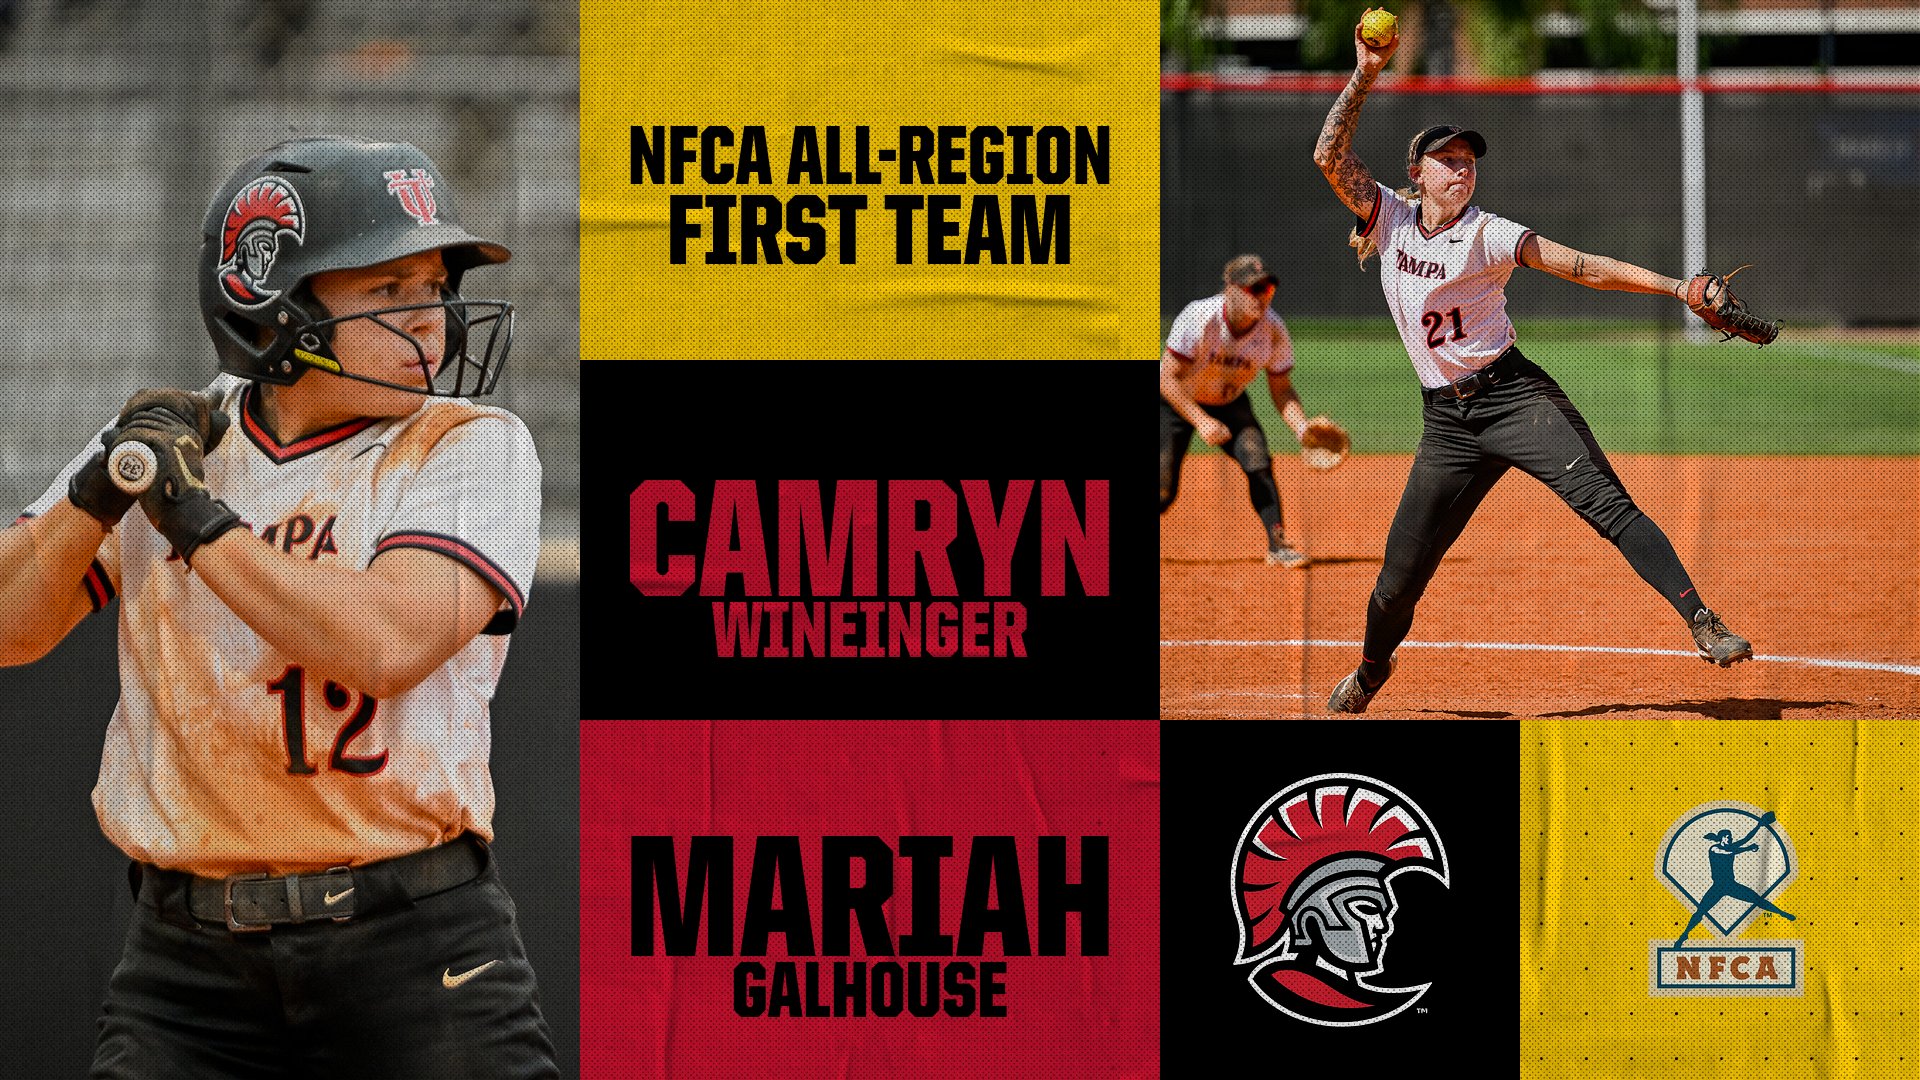 Mariah Galhouse, Camryn Wineinger Named All-South Region